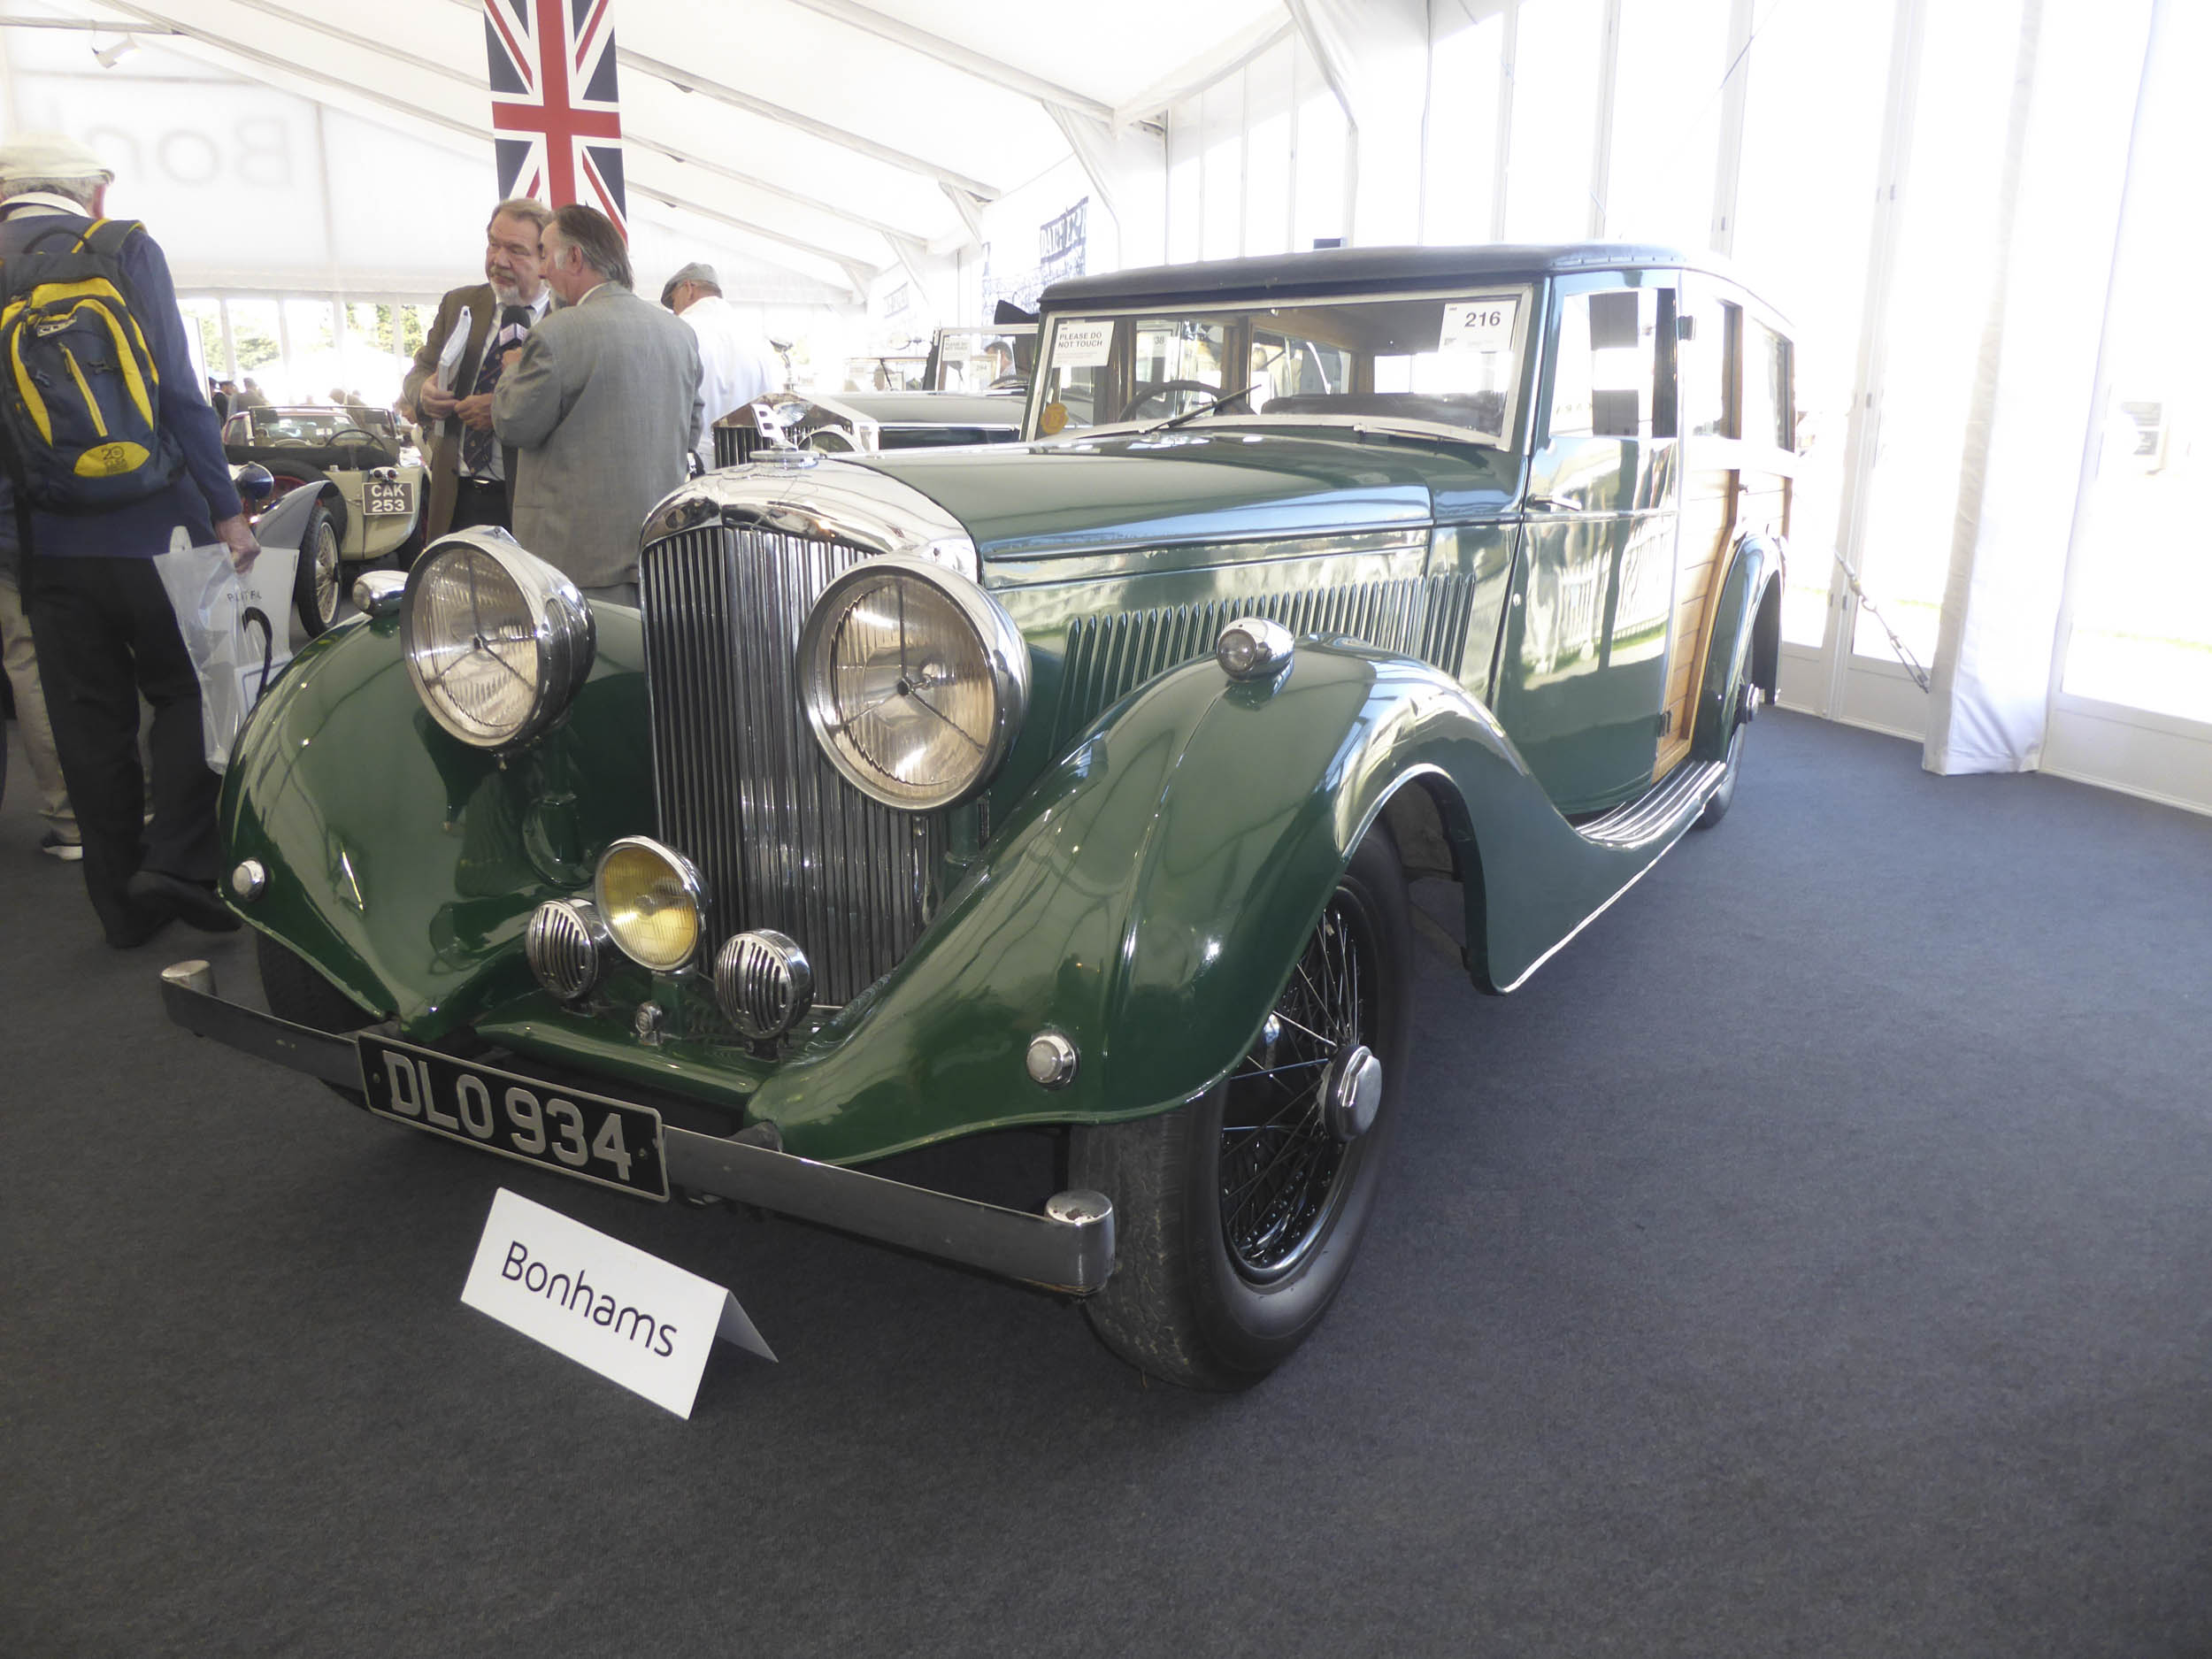 The Bar View – Richard Barnett picks out the more off-beat motors offered at auction